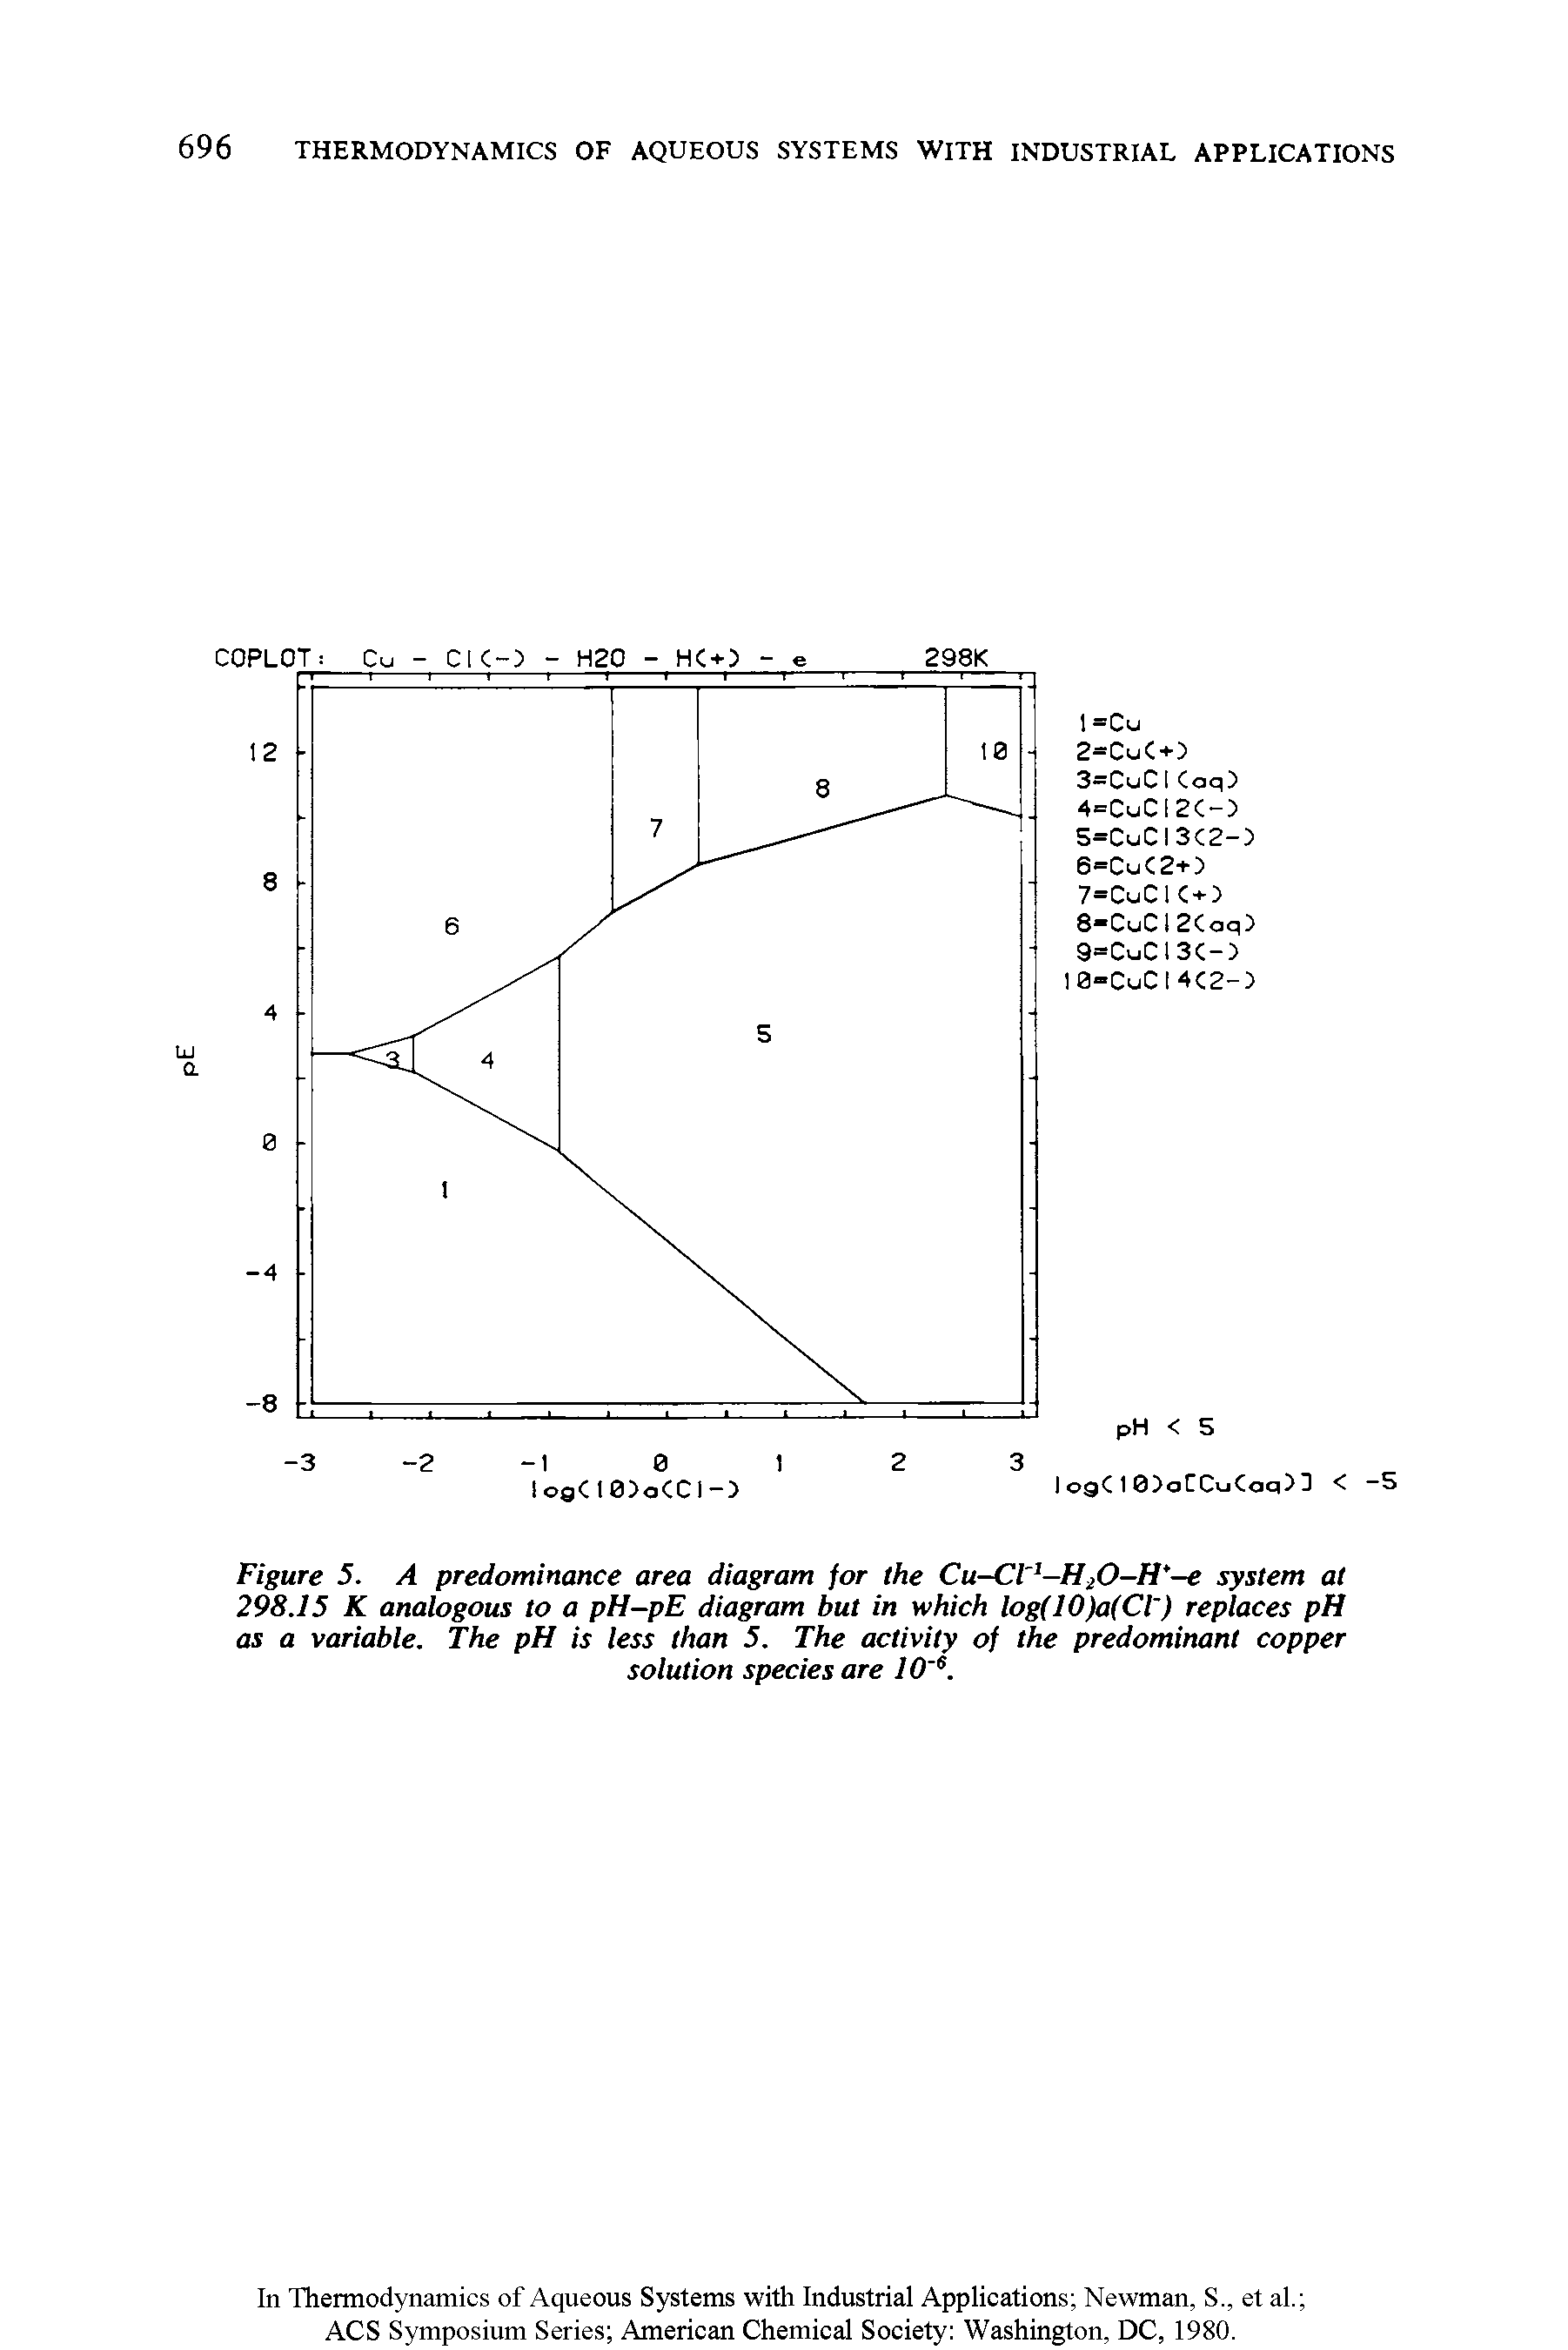 Figure 5. A predominance area diagram for the Cu-Cl -H20-H -e system at 298.15 K analogous to a pH-pE diagram but in which log(10)a(Cl ) replaces pH as a variable. The pH is less than 5. The activity of the predominant copper solution species are 10 e.